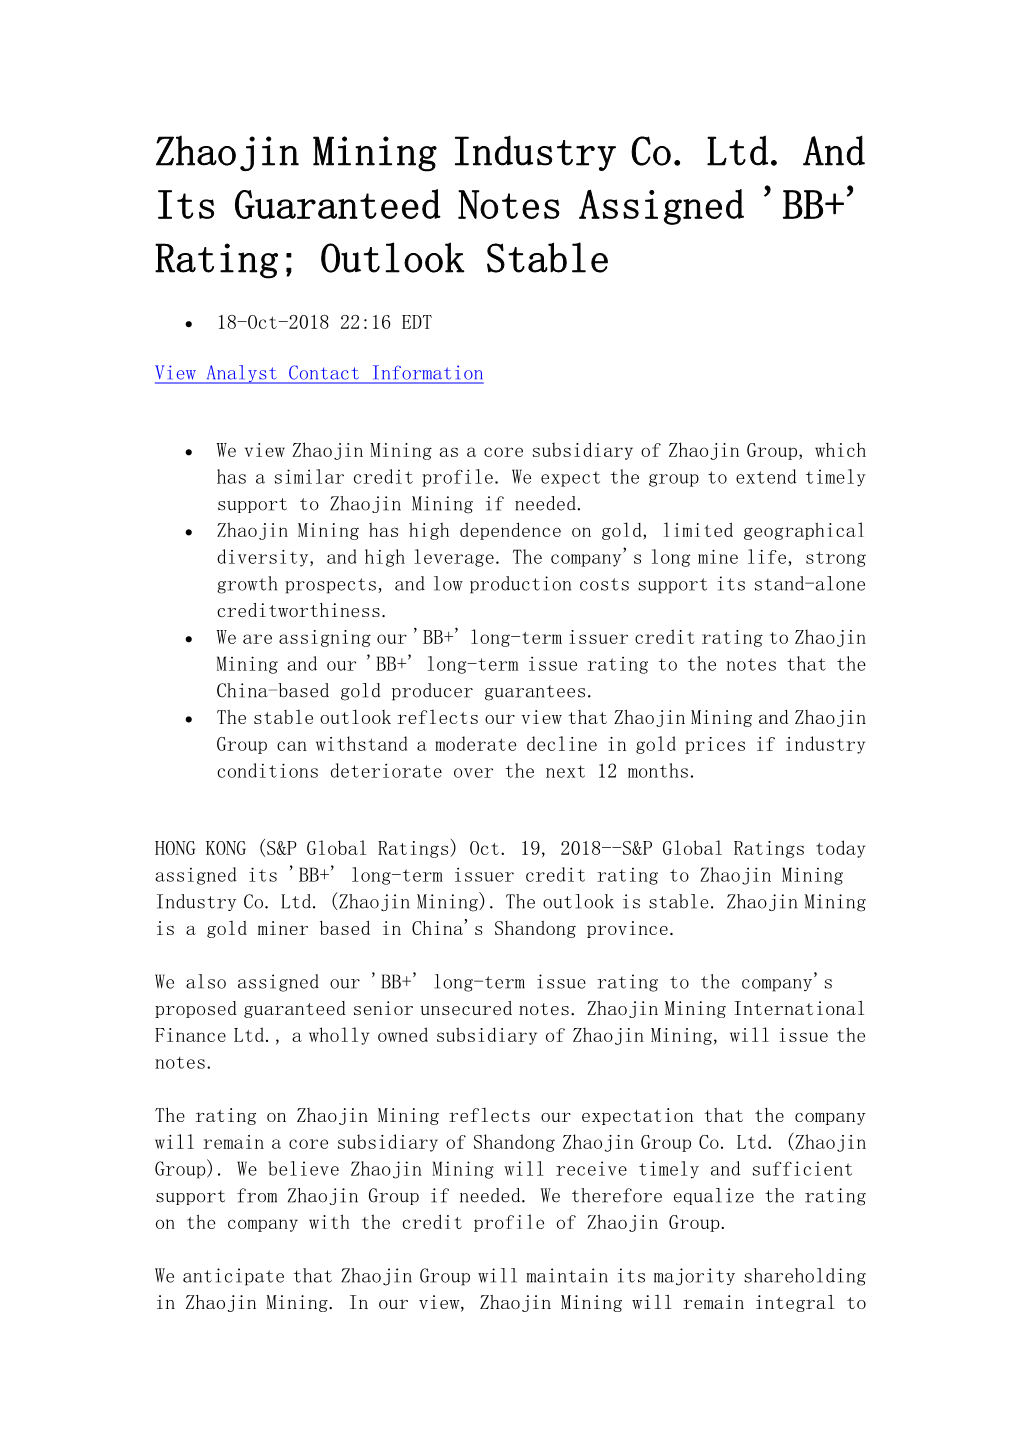 Zhaojin Mining Industry Co. Ltd. and Its Guaranteed Notes Assigned 'BB+' Rating; Outlook Stable